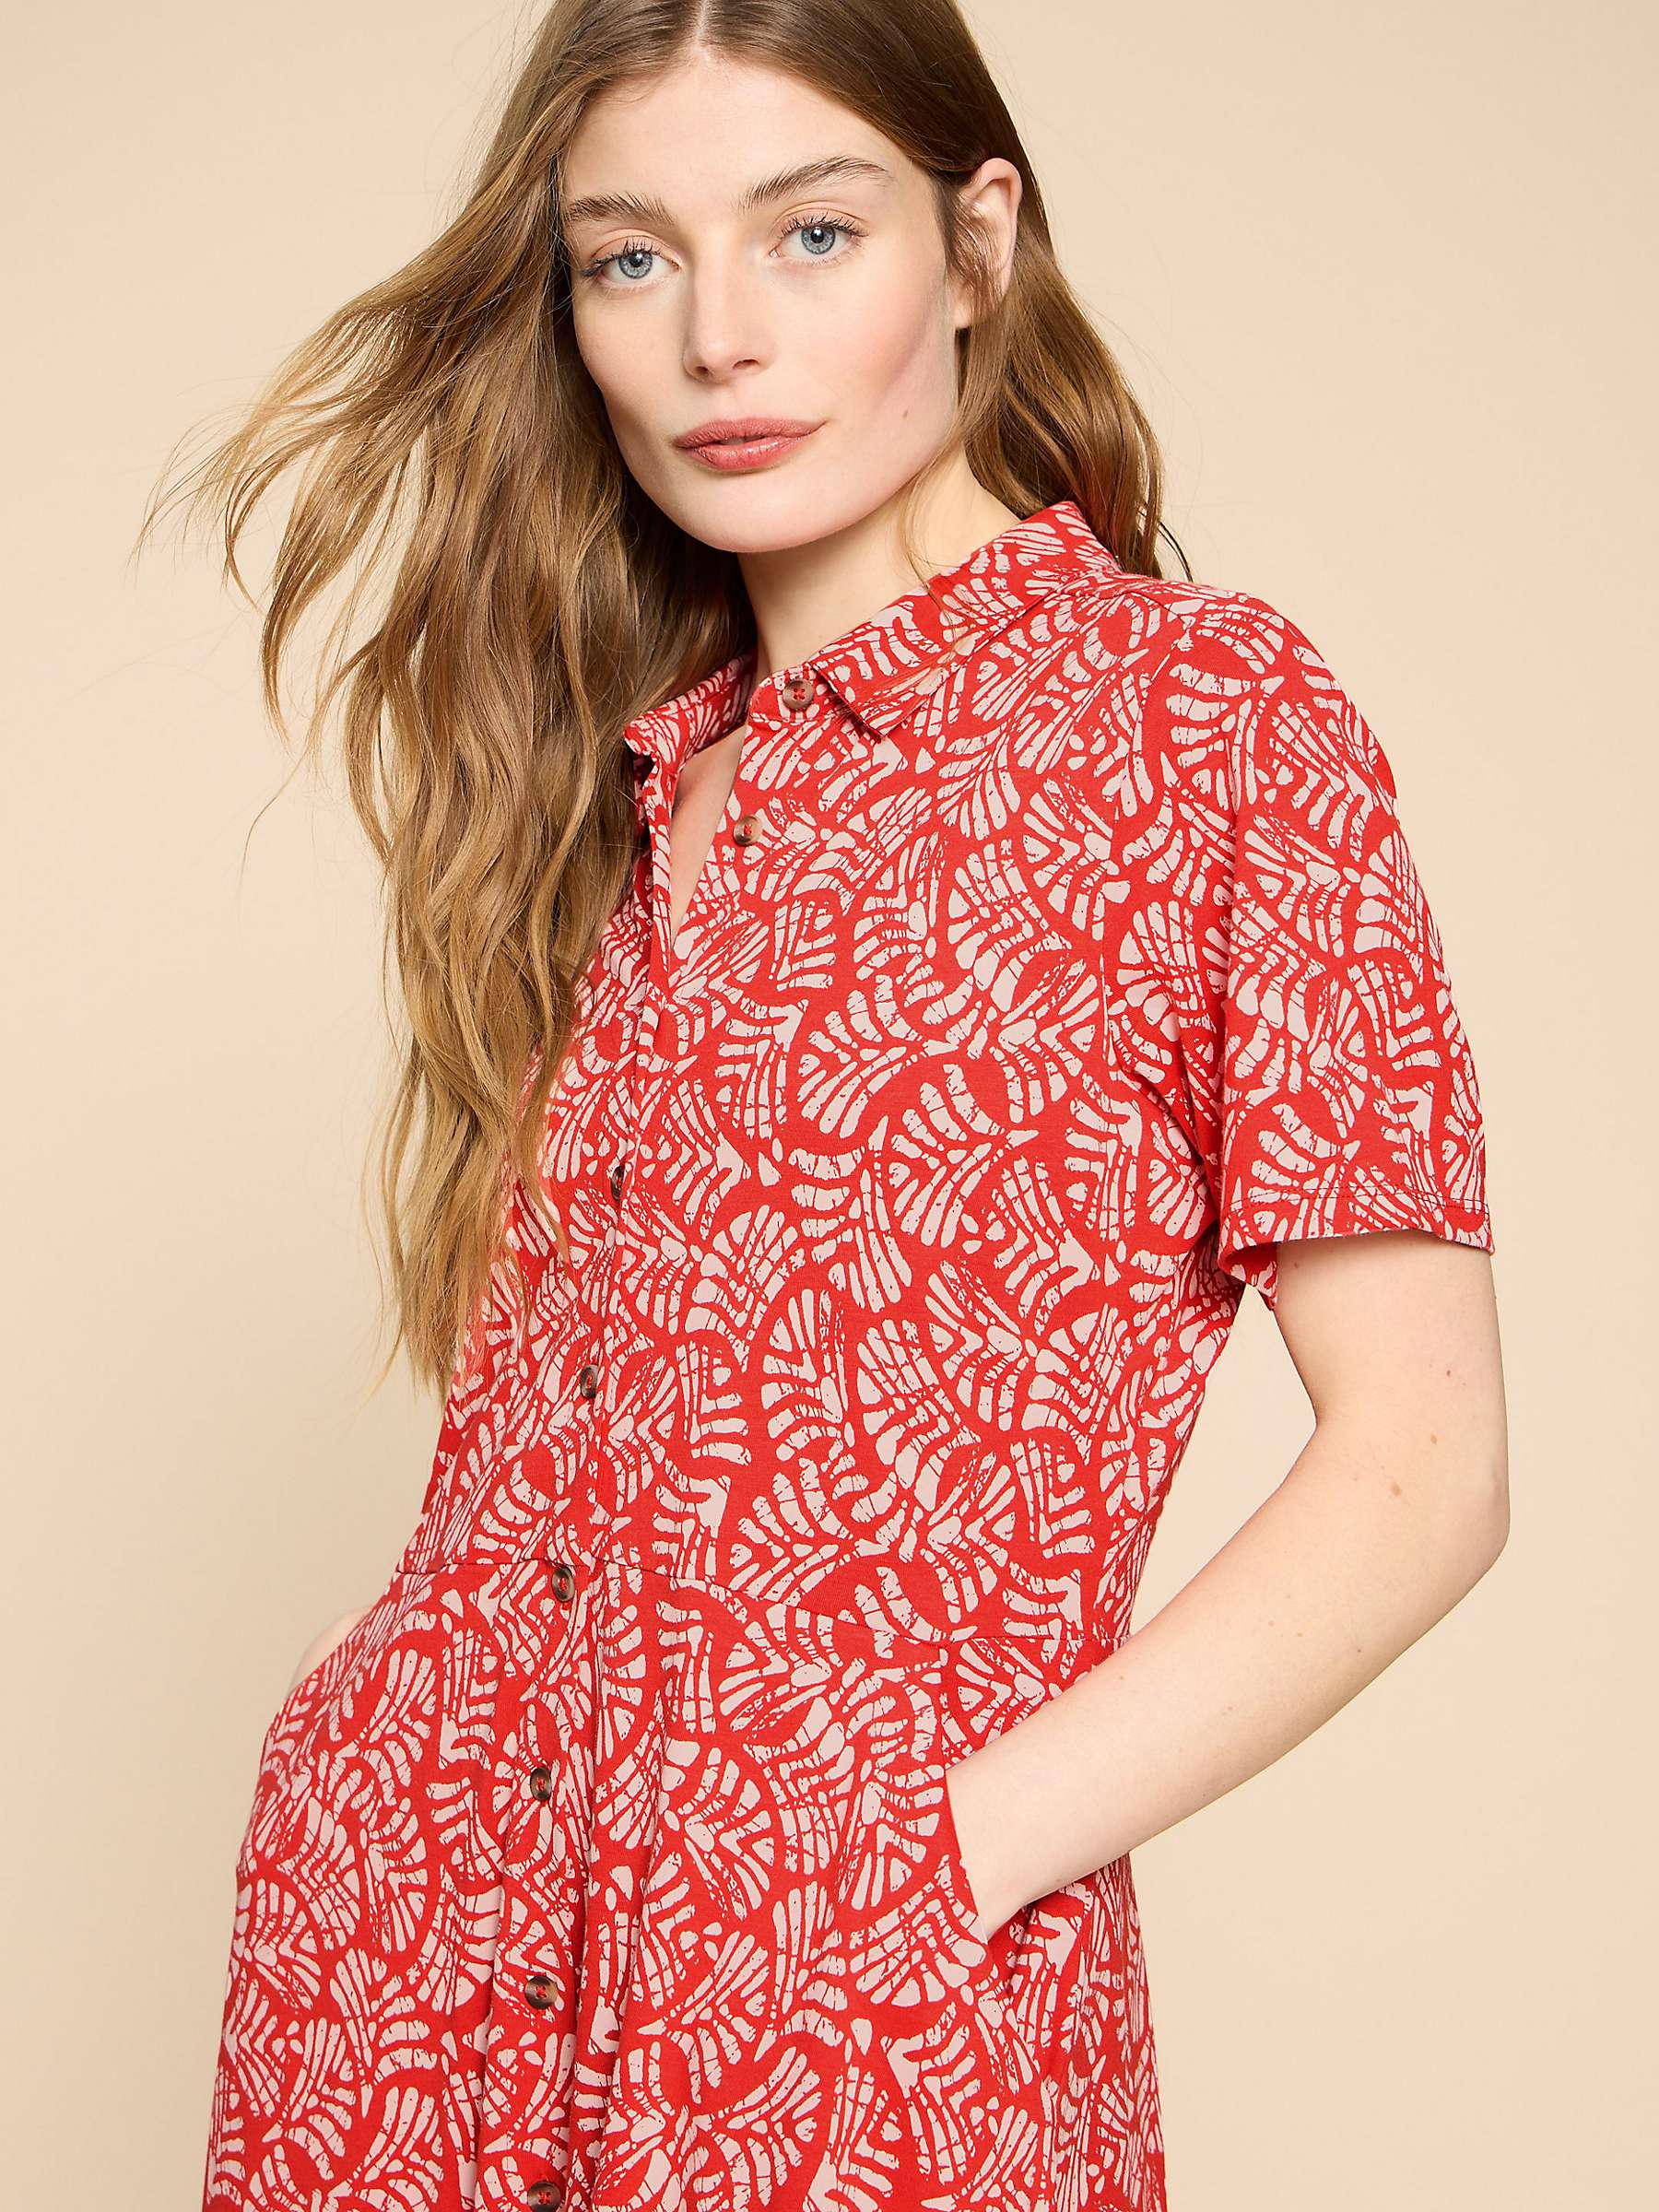 Buy White Stuff Ria Abstract Print Jersey Shirt Dress, Red/White Online at johnlewis.com